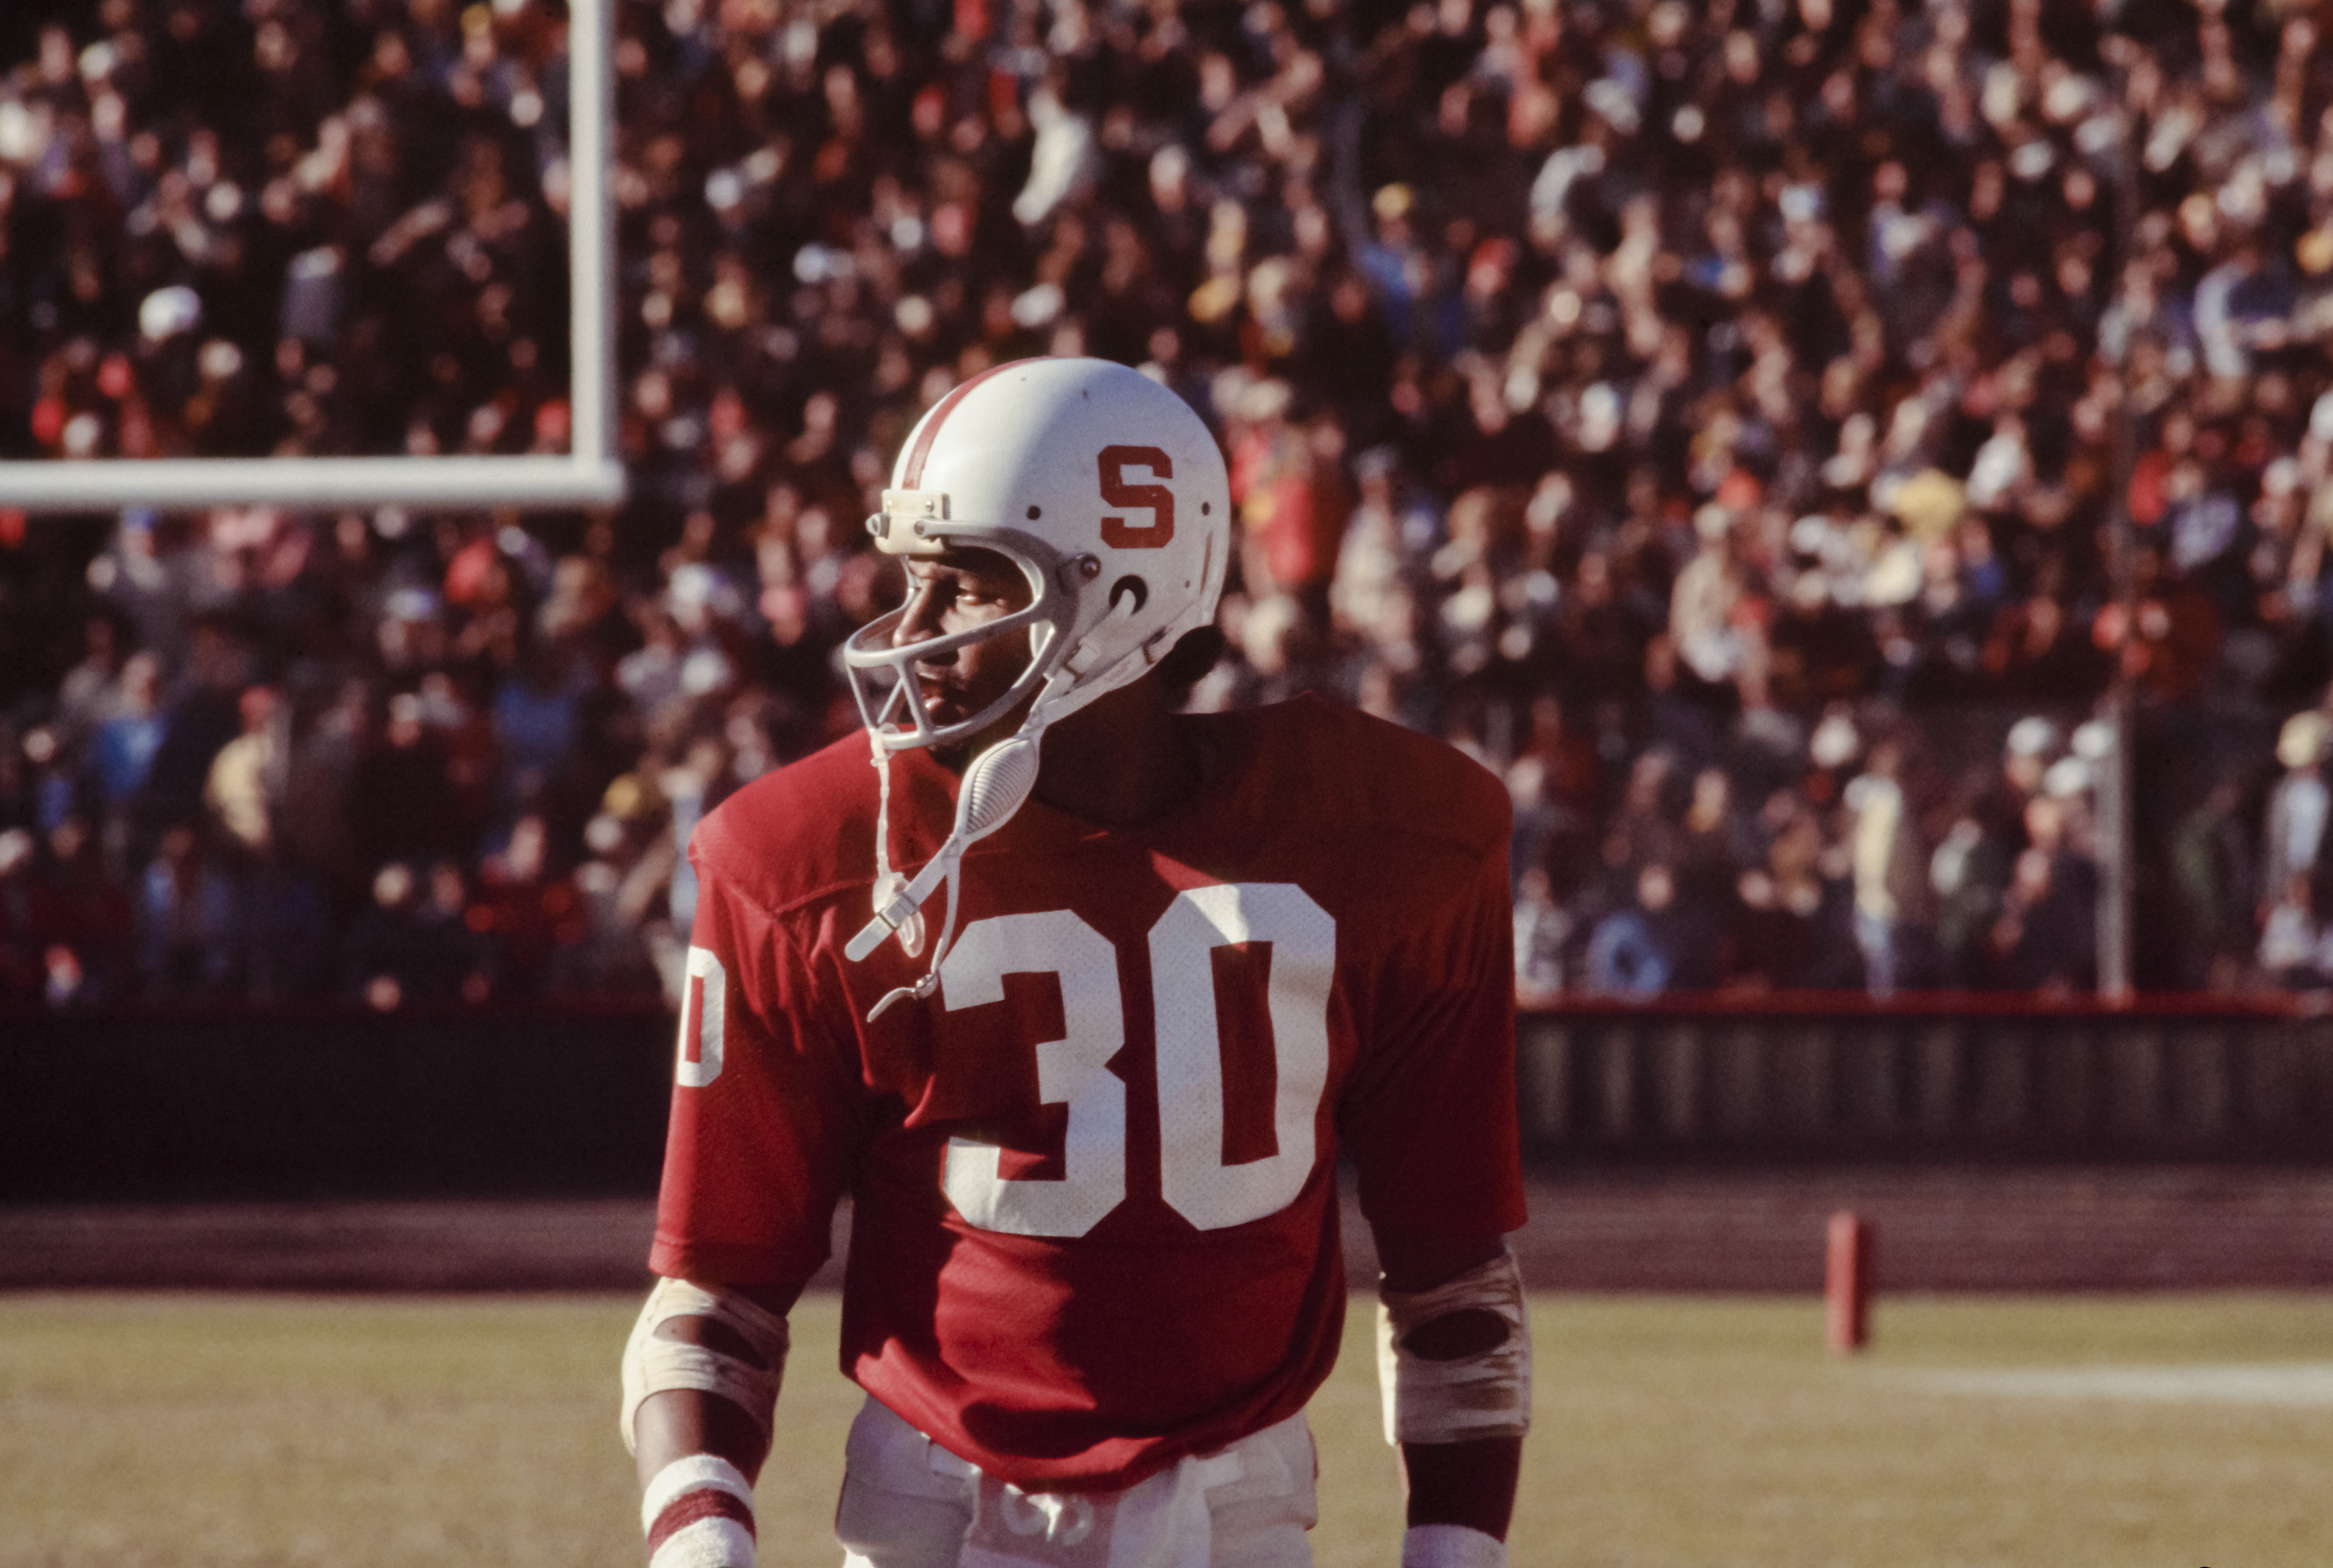 Wide receiver James Lofton of Stanford University leaves the field during a PAC-8 NCAA football game in 1977